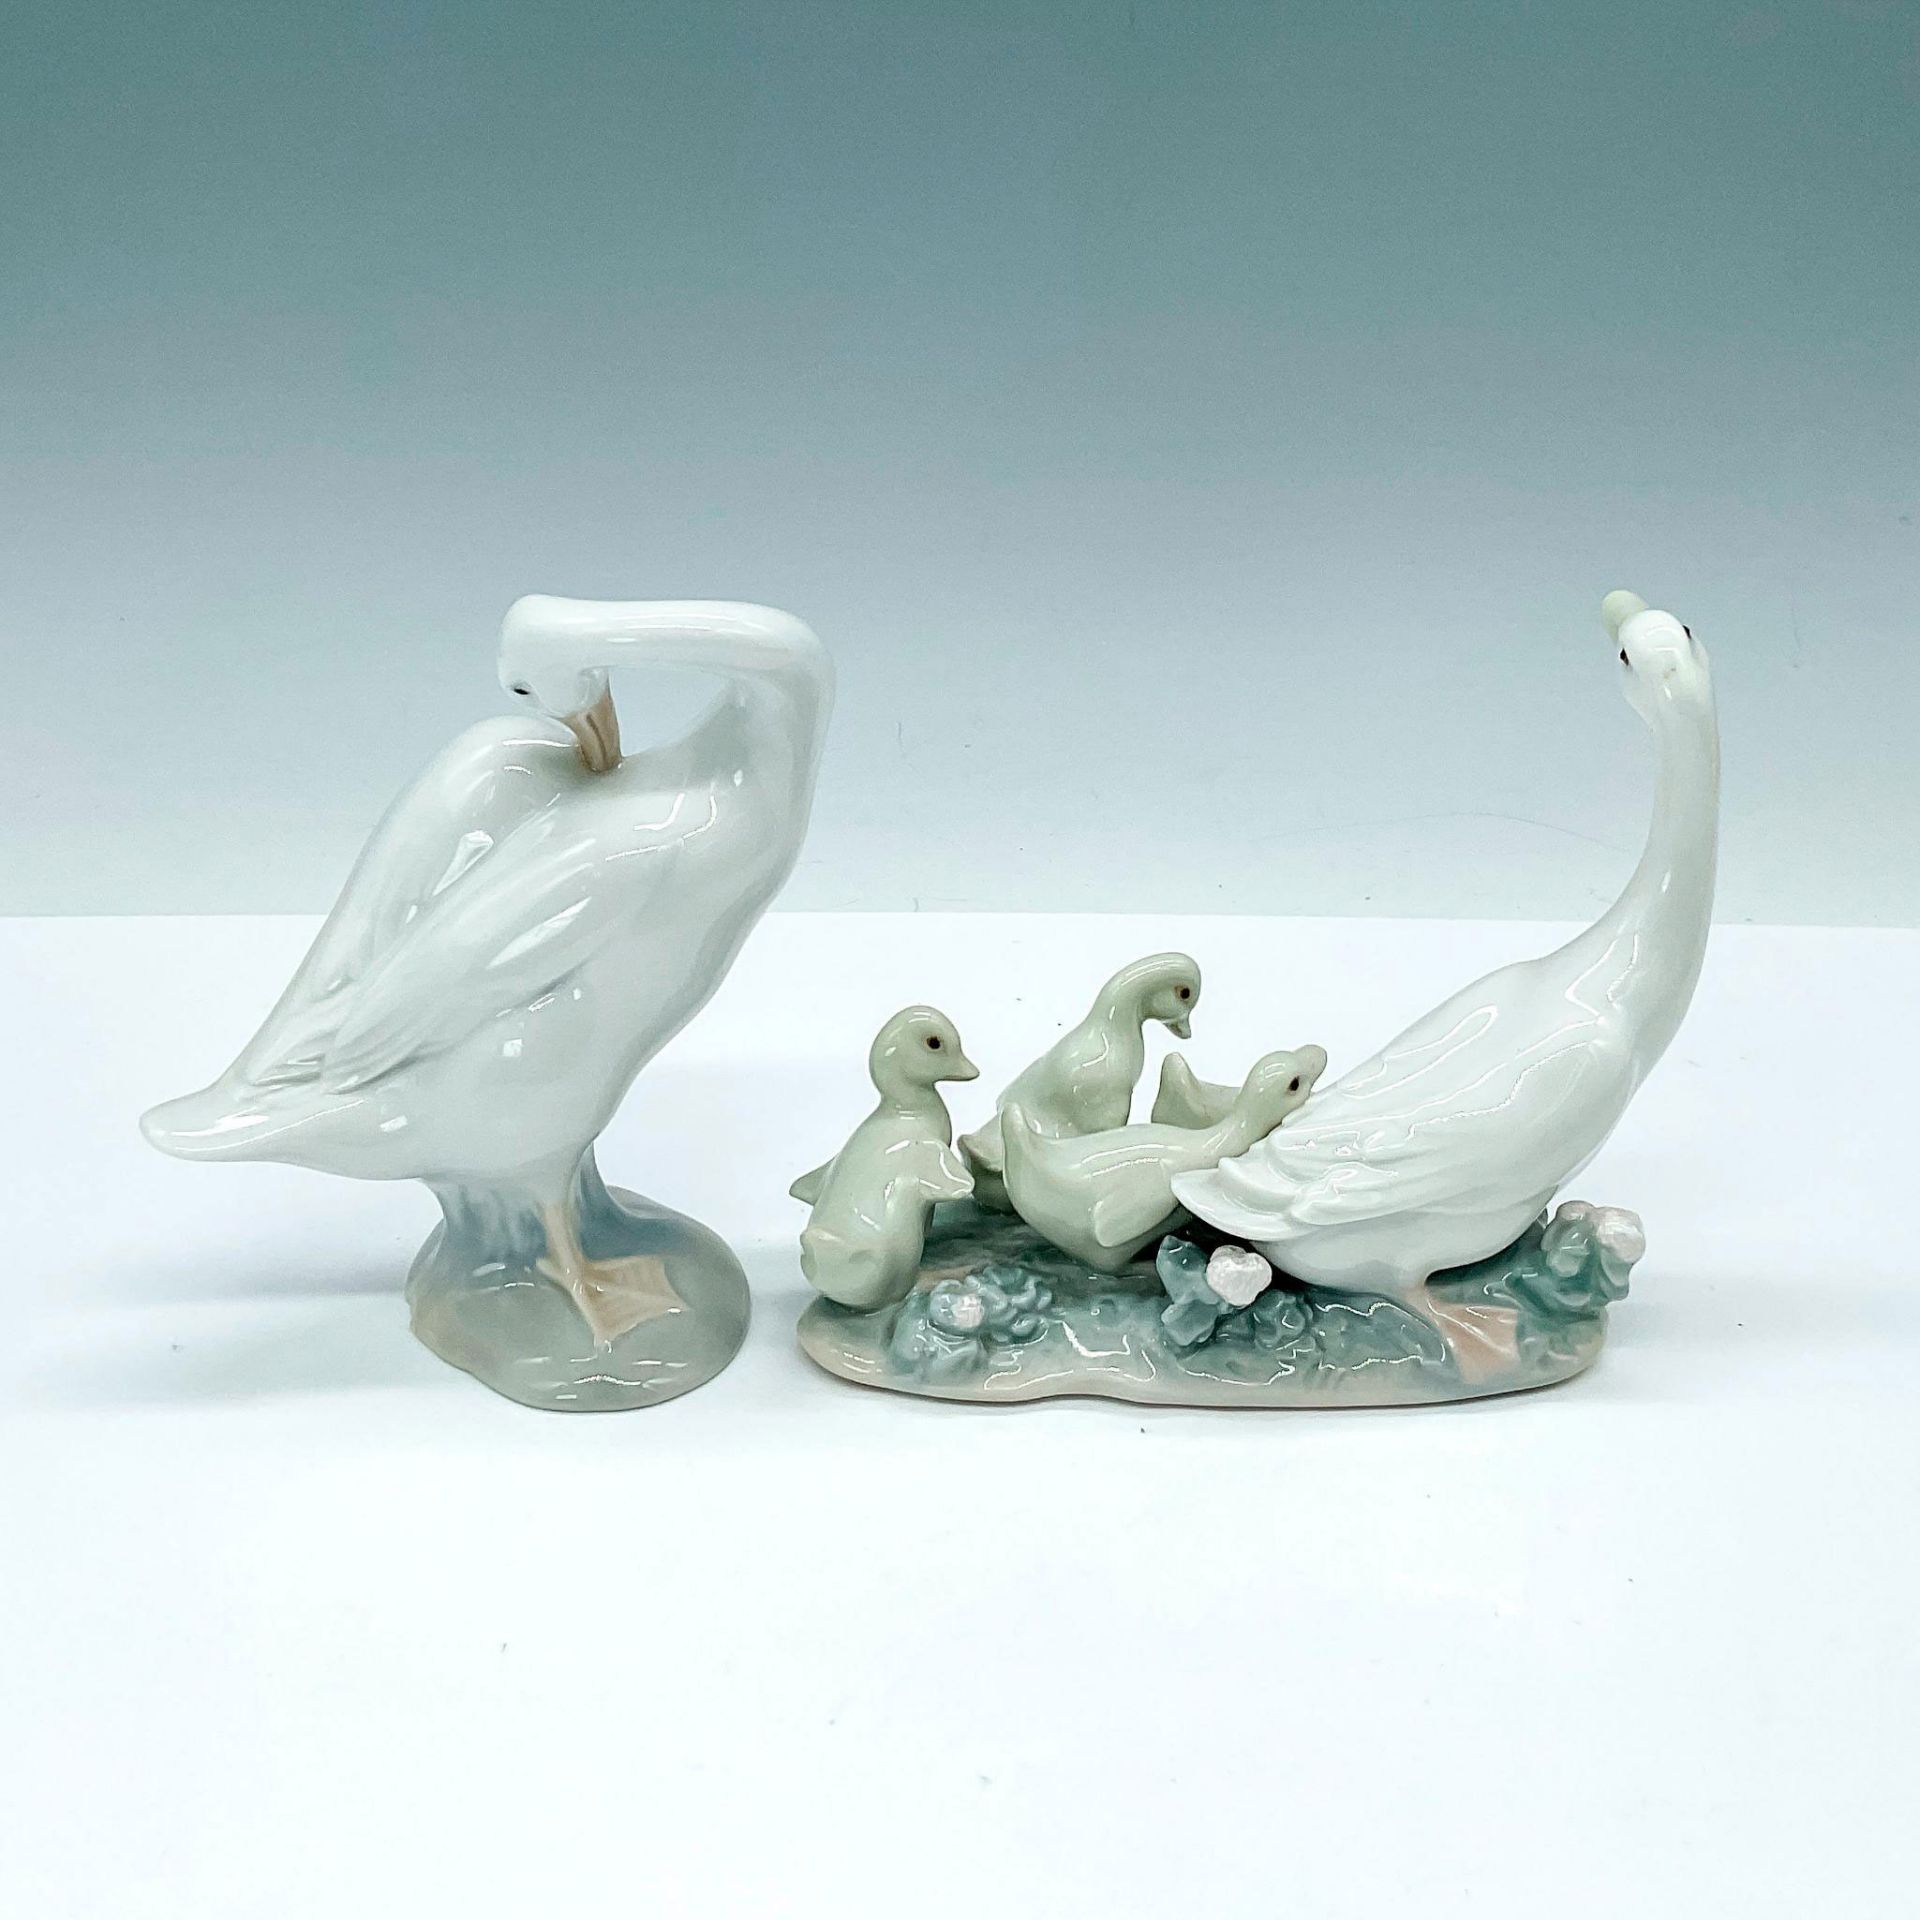 Pair of Lladro Porcelain Figurines, Duck Family - Image 2 of 4